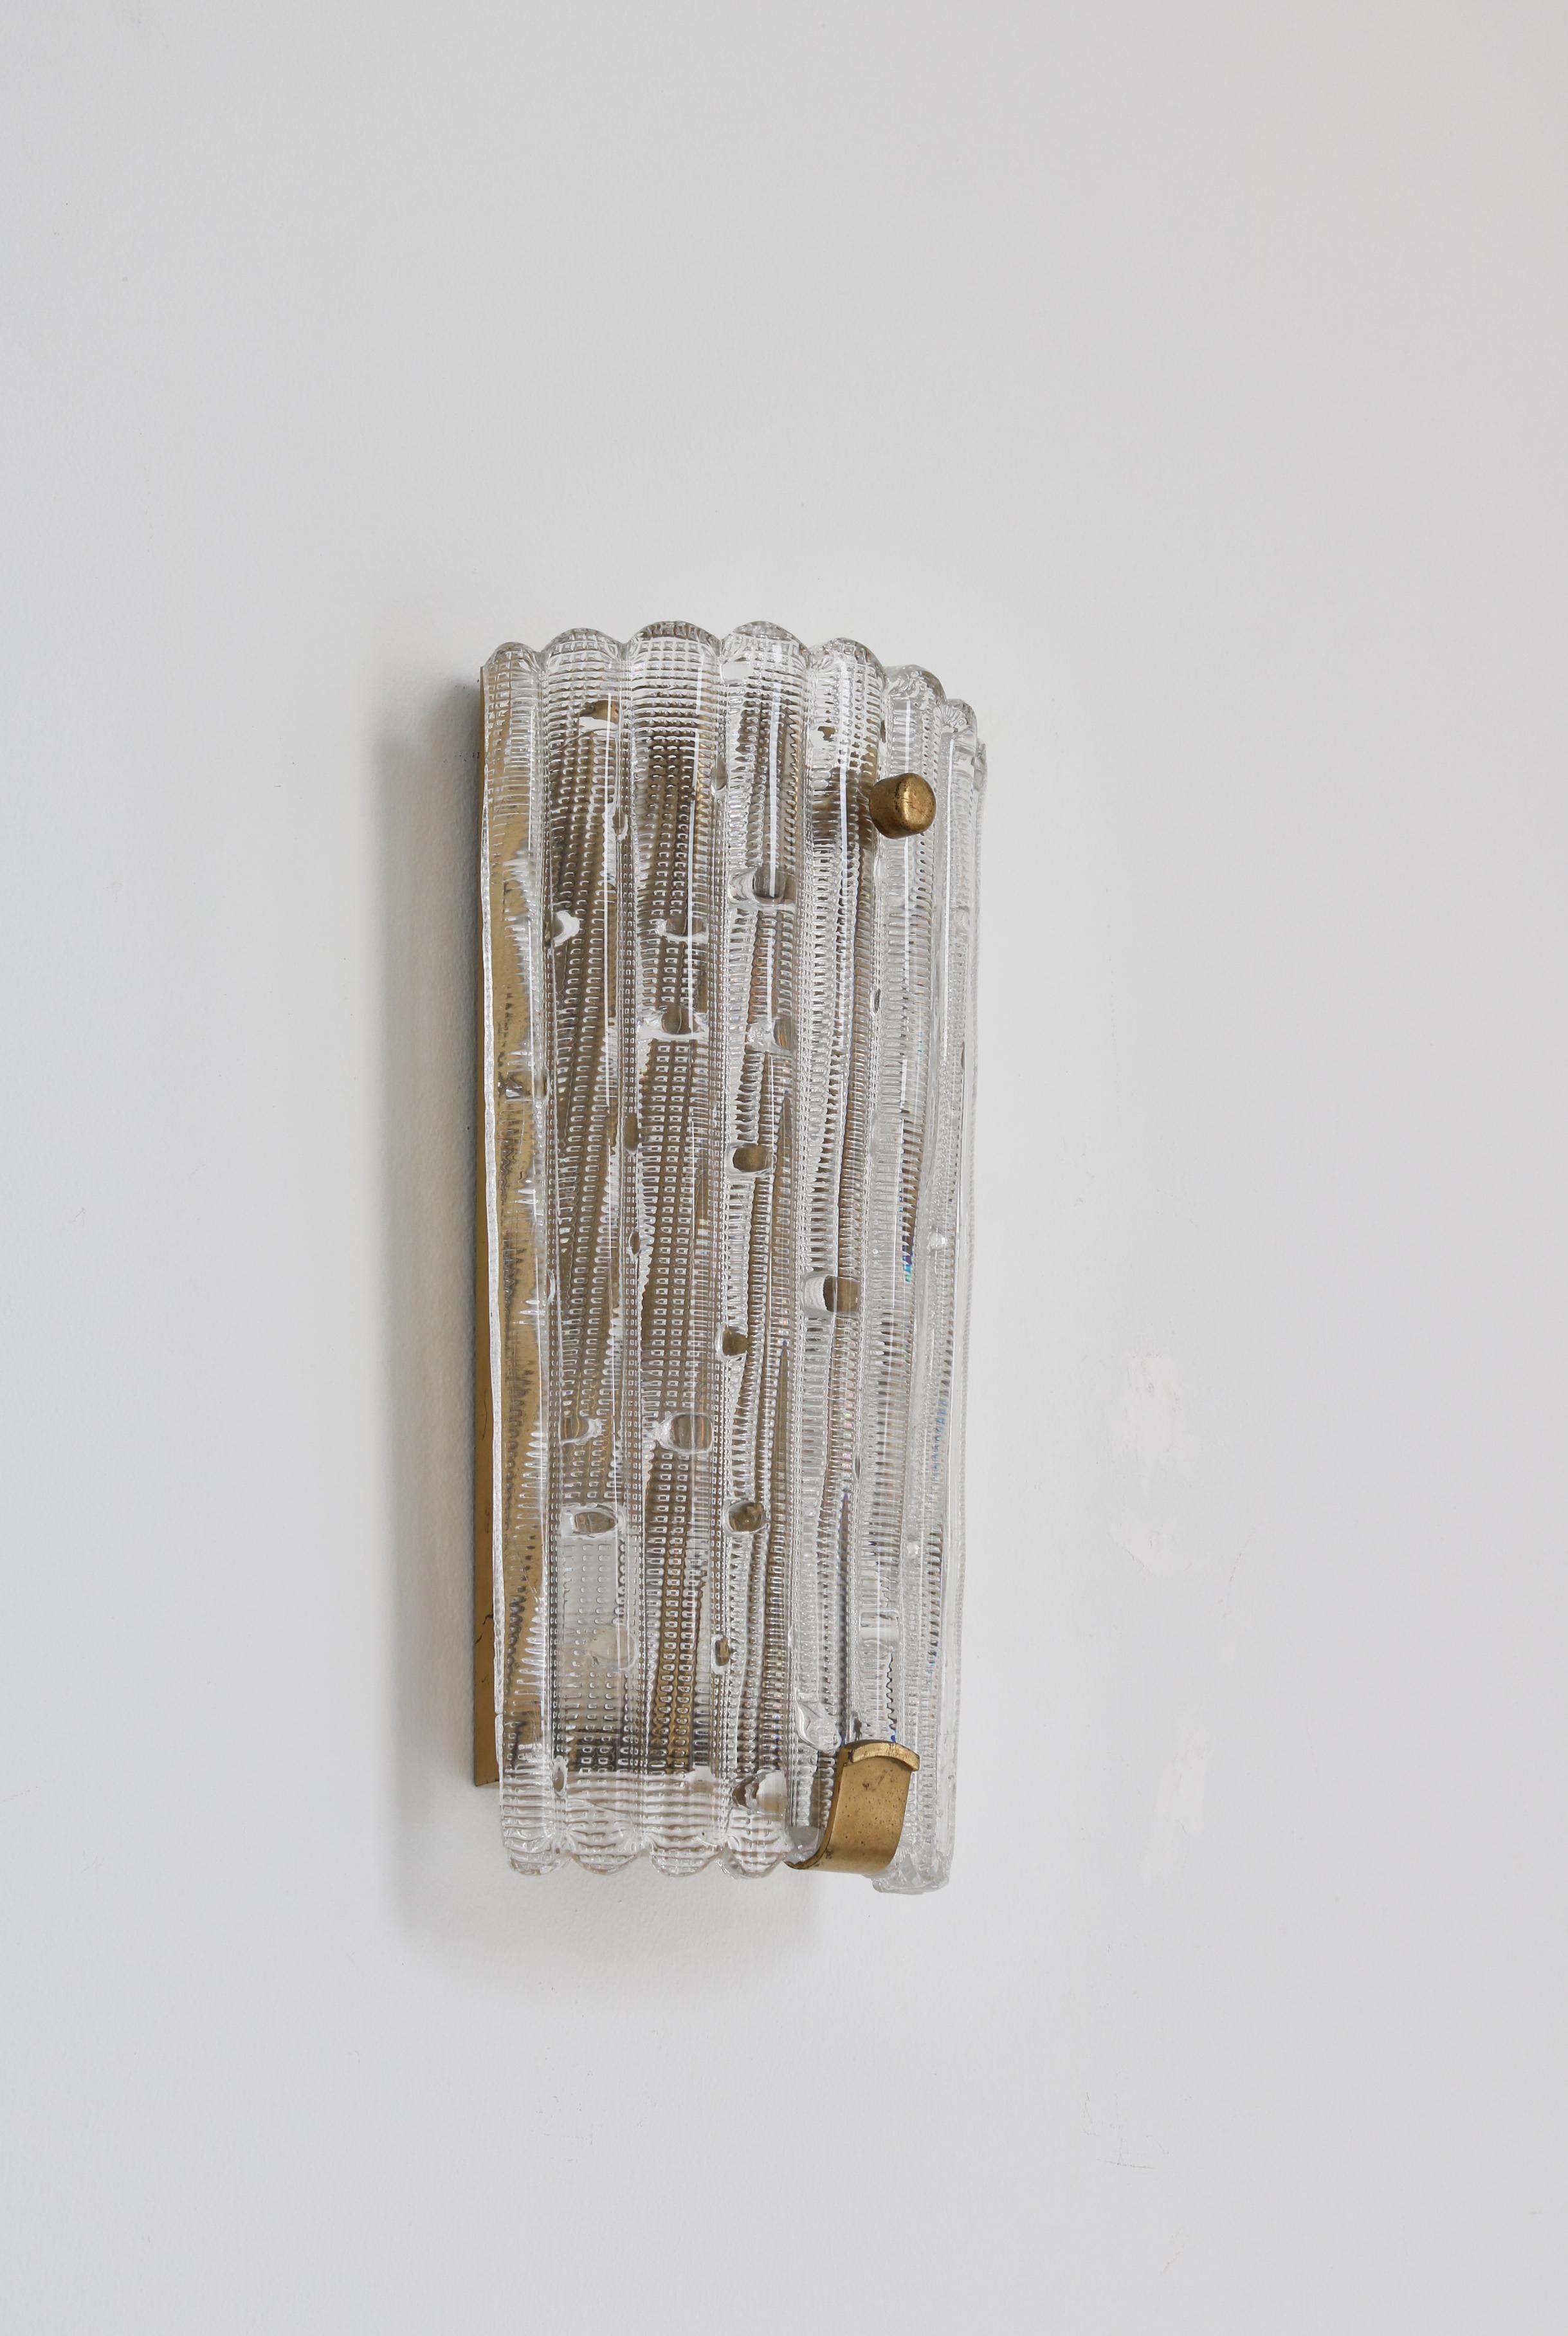 Danish Set of Large Crystal Glass & Brass Wall Sconces by Lyfa Orrefors, Denmark, 1950s For Sale